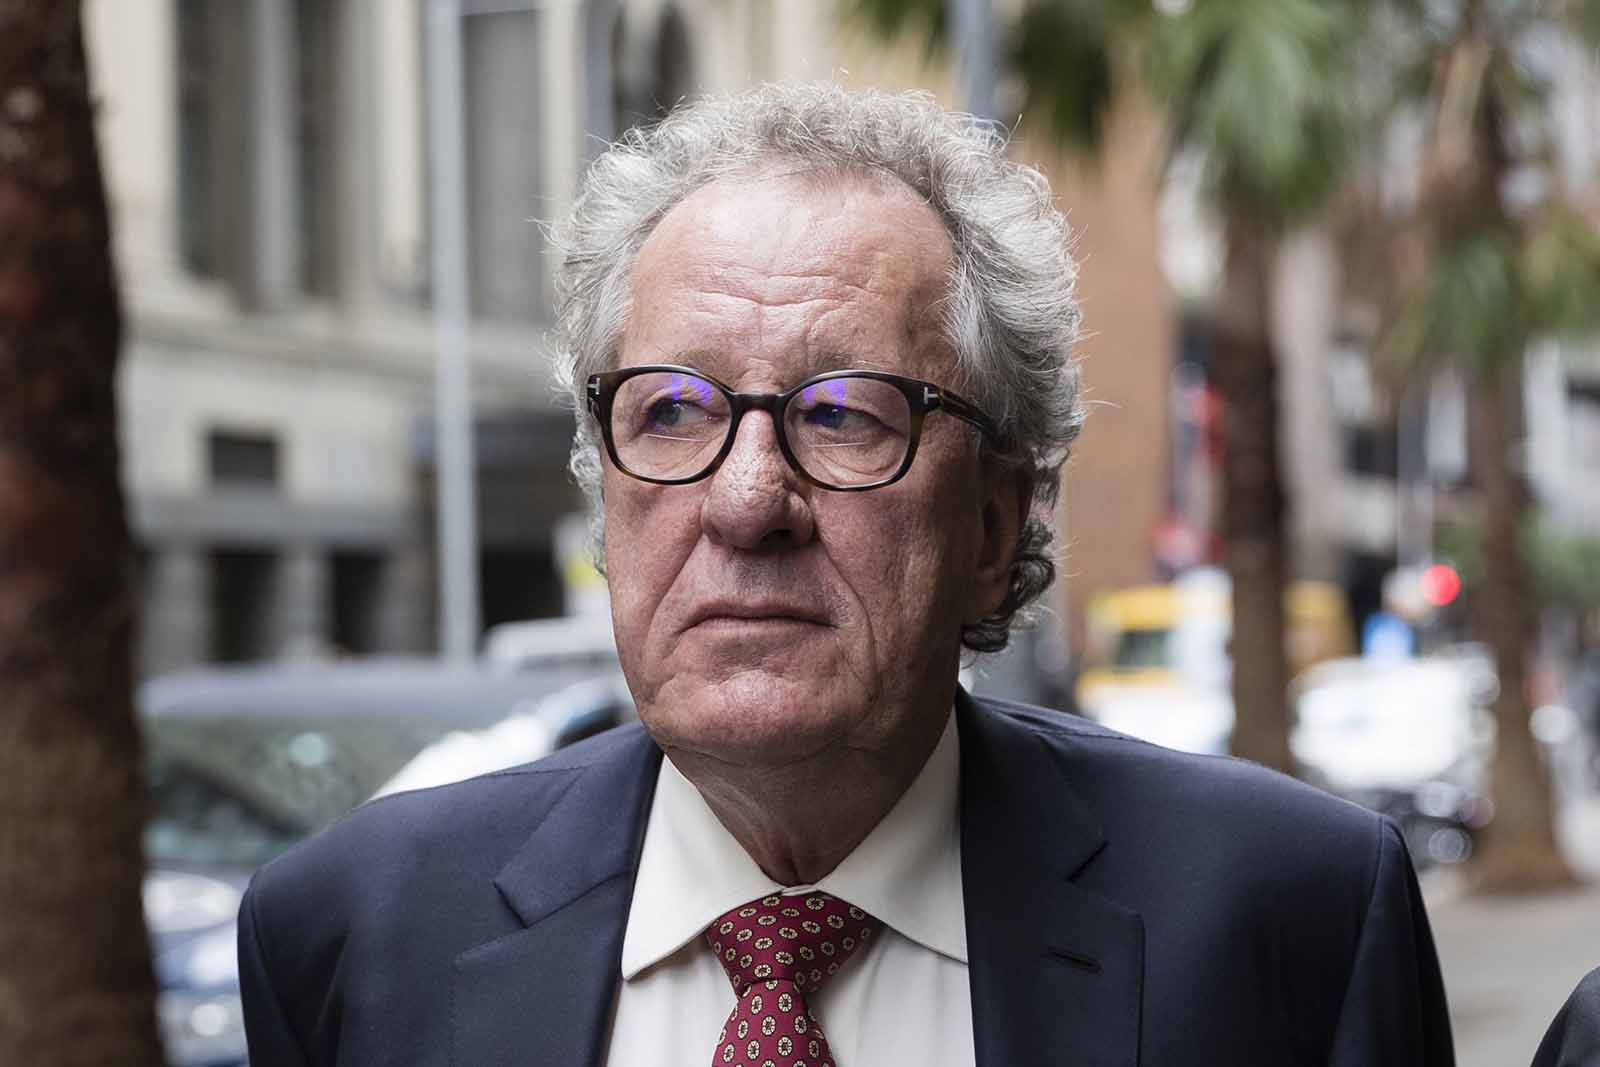 Geoffrey Rush made his way in the world as a theater legend, but that legacy was blackened by claims of sexual assault. But did he actually assault anyone?